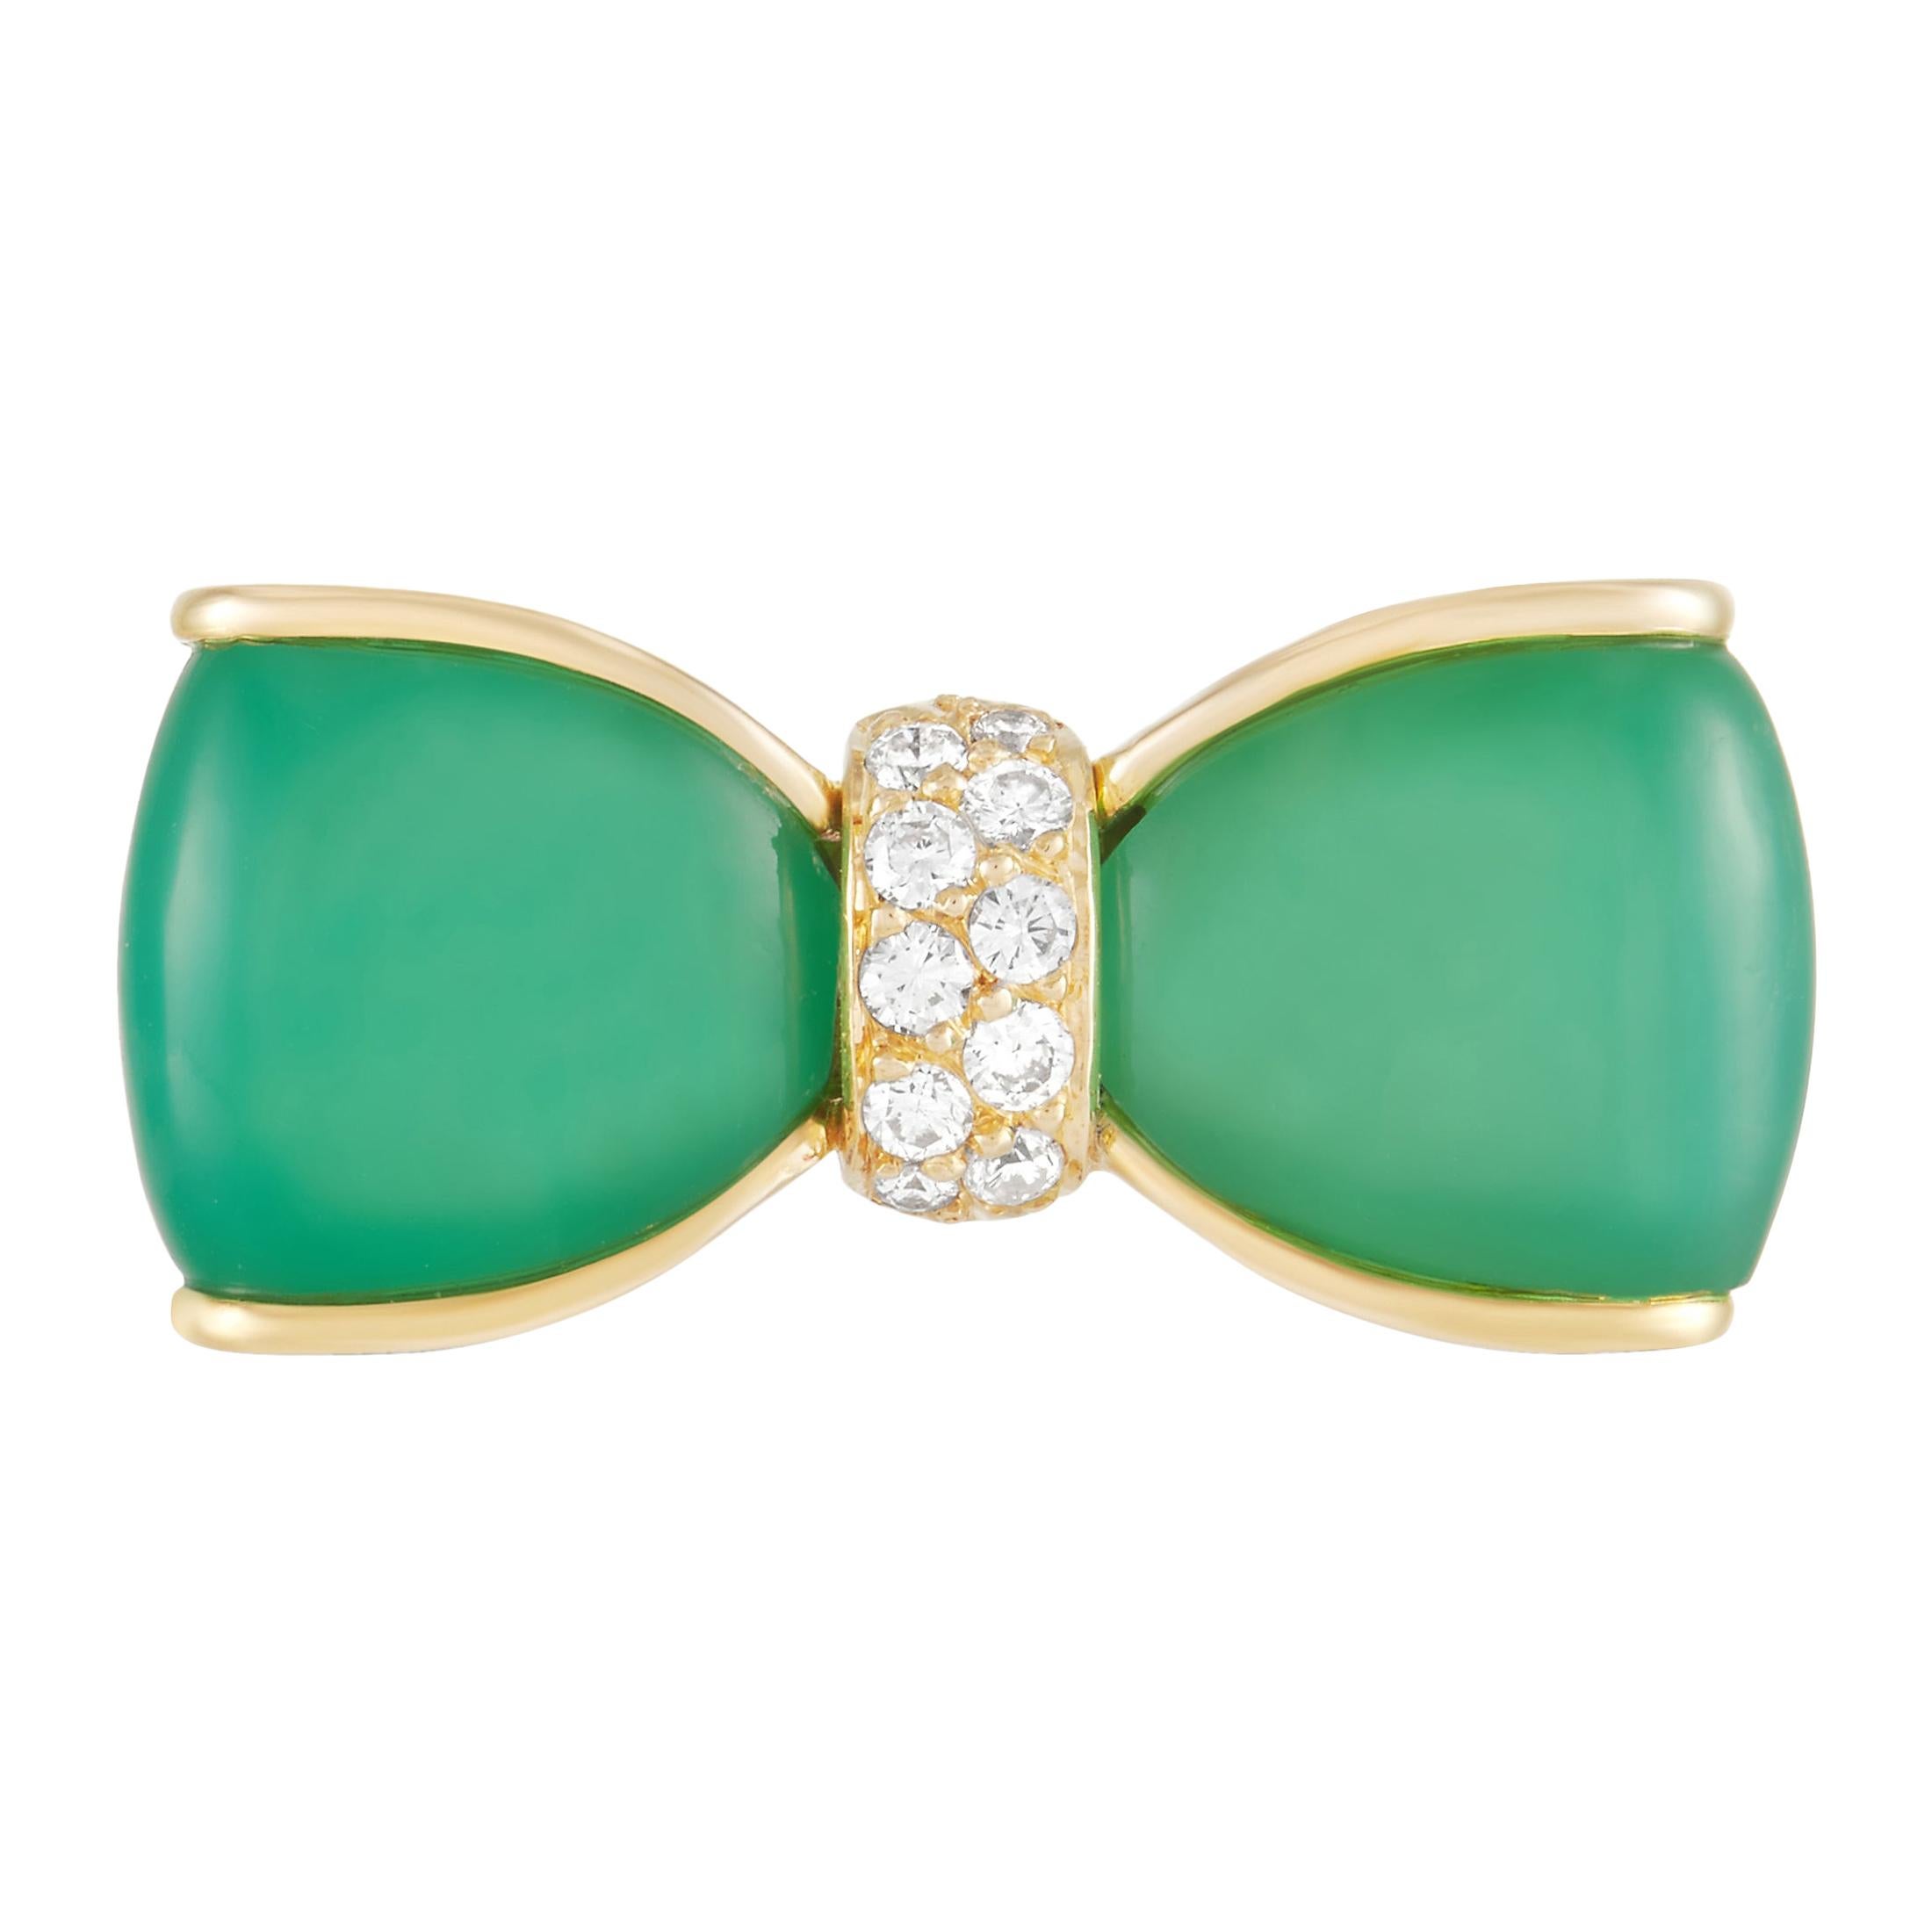 Van Cleef & Arpels Vintage 18K Yellow Gold 0.19 Ct Diamond and Chrysoprase Bow